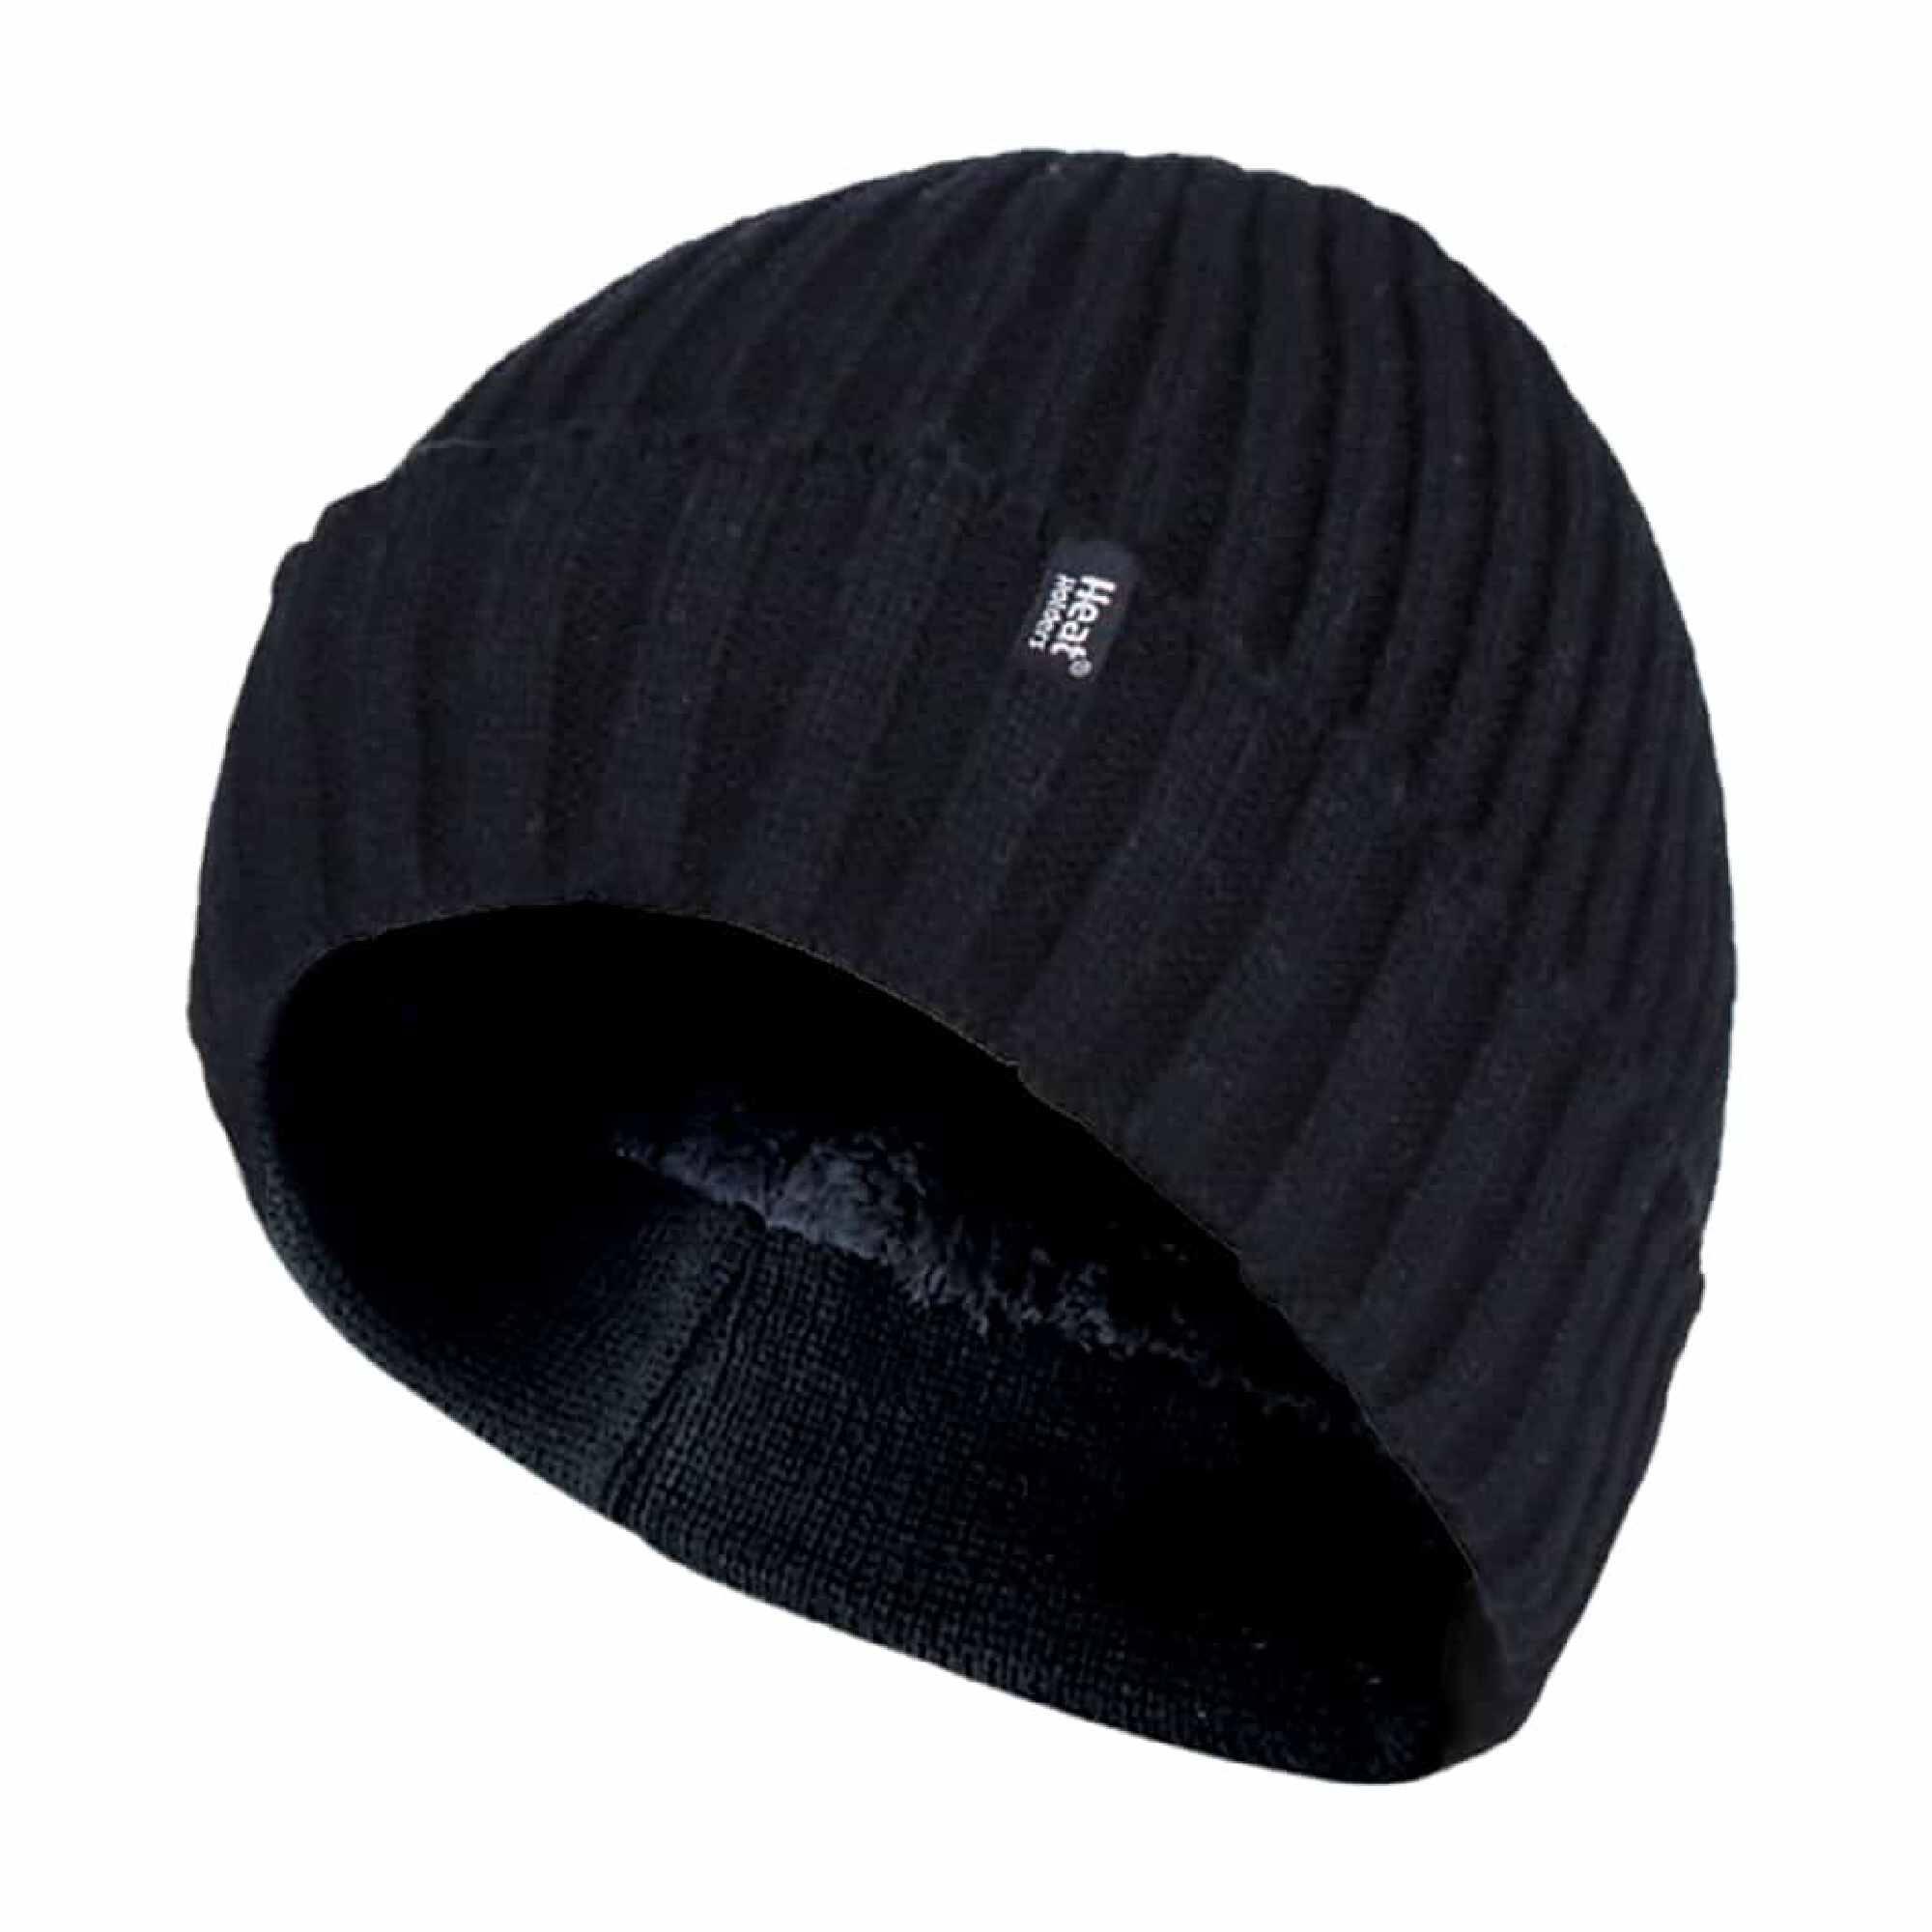 HEAT HOLDERS Mens 3.6 TOG Fleece Lined Thermal Turn Over Cuff Winter Beanie Hat